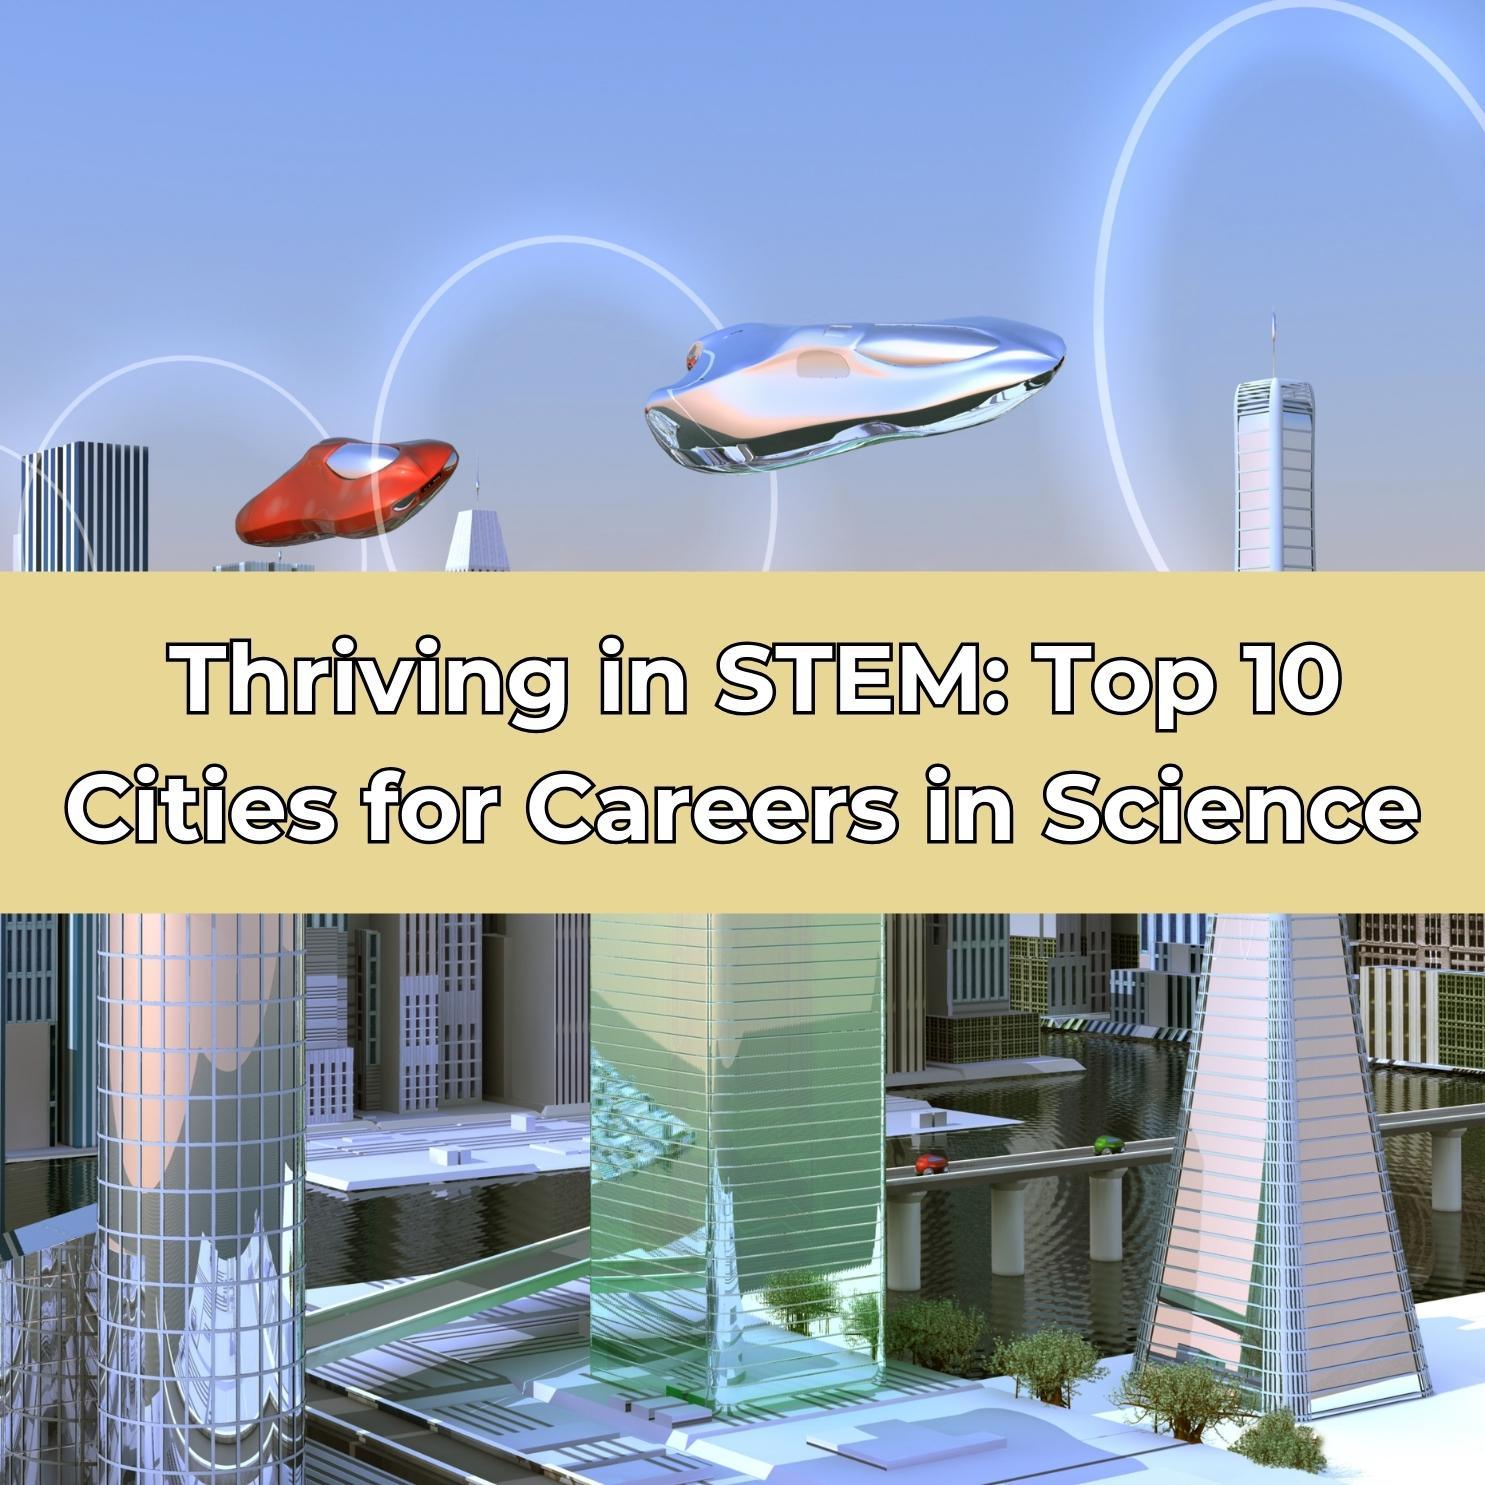 Thriving in STEM: Top 10 Cities for Careers in Science